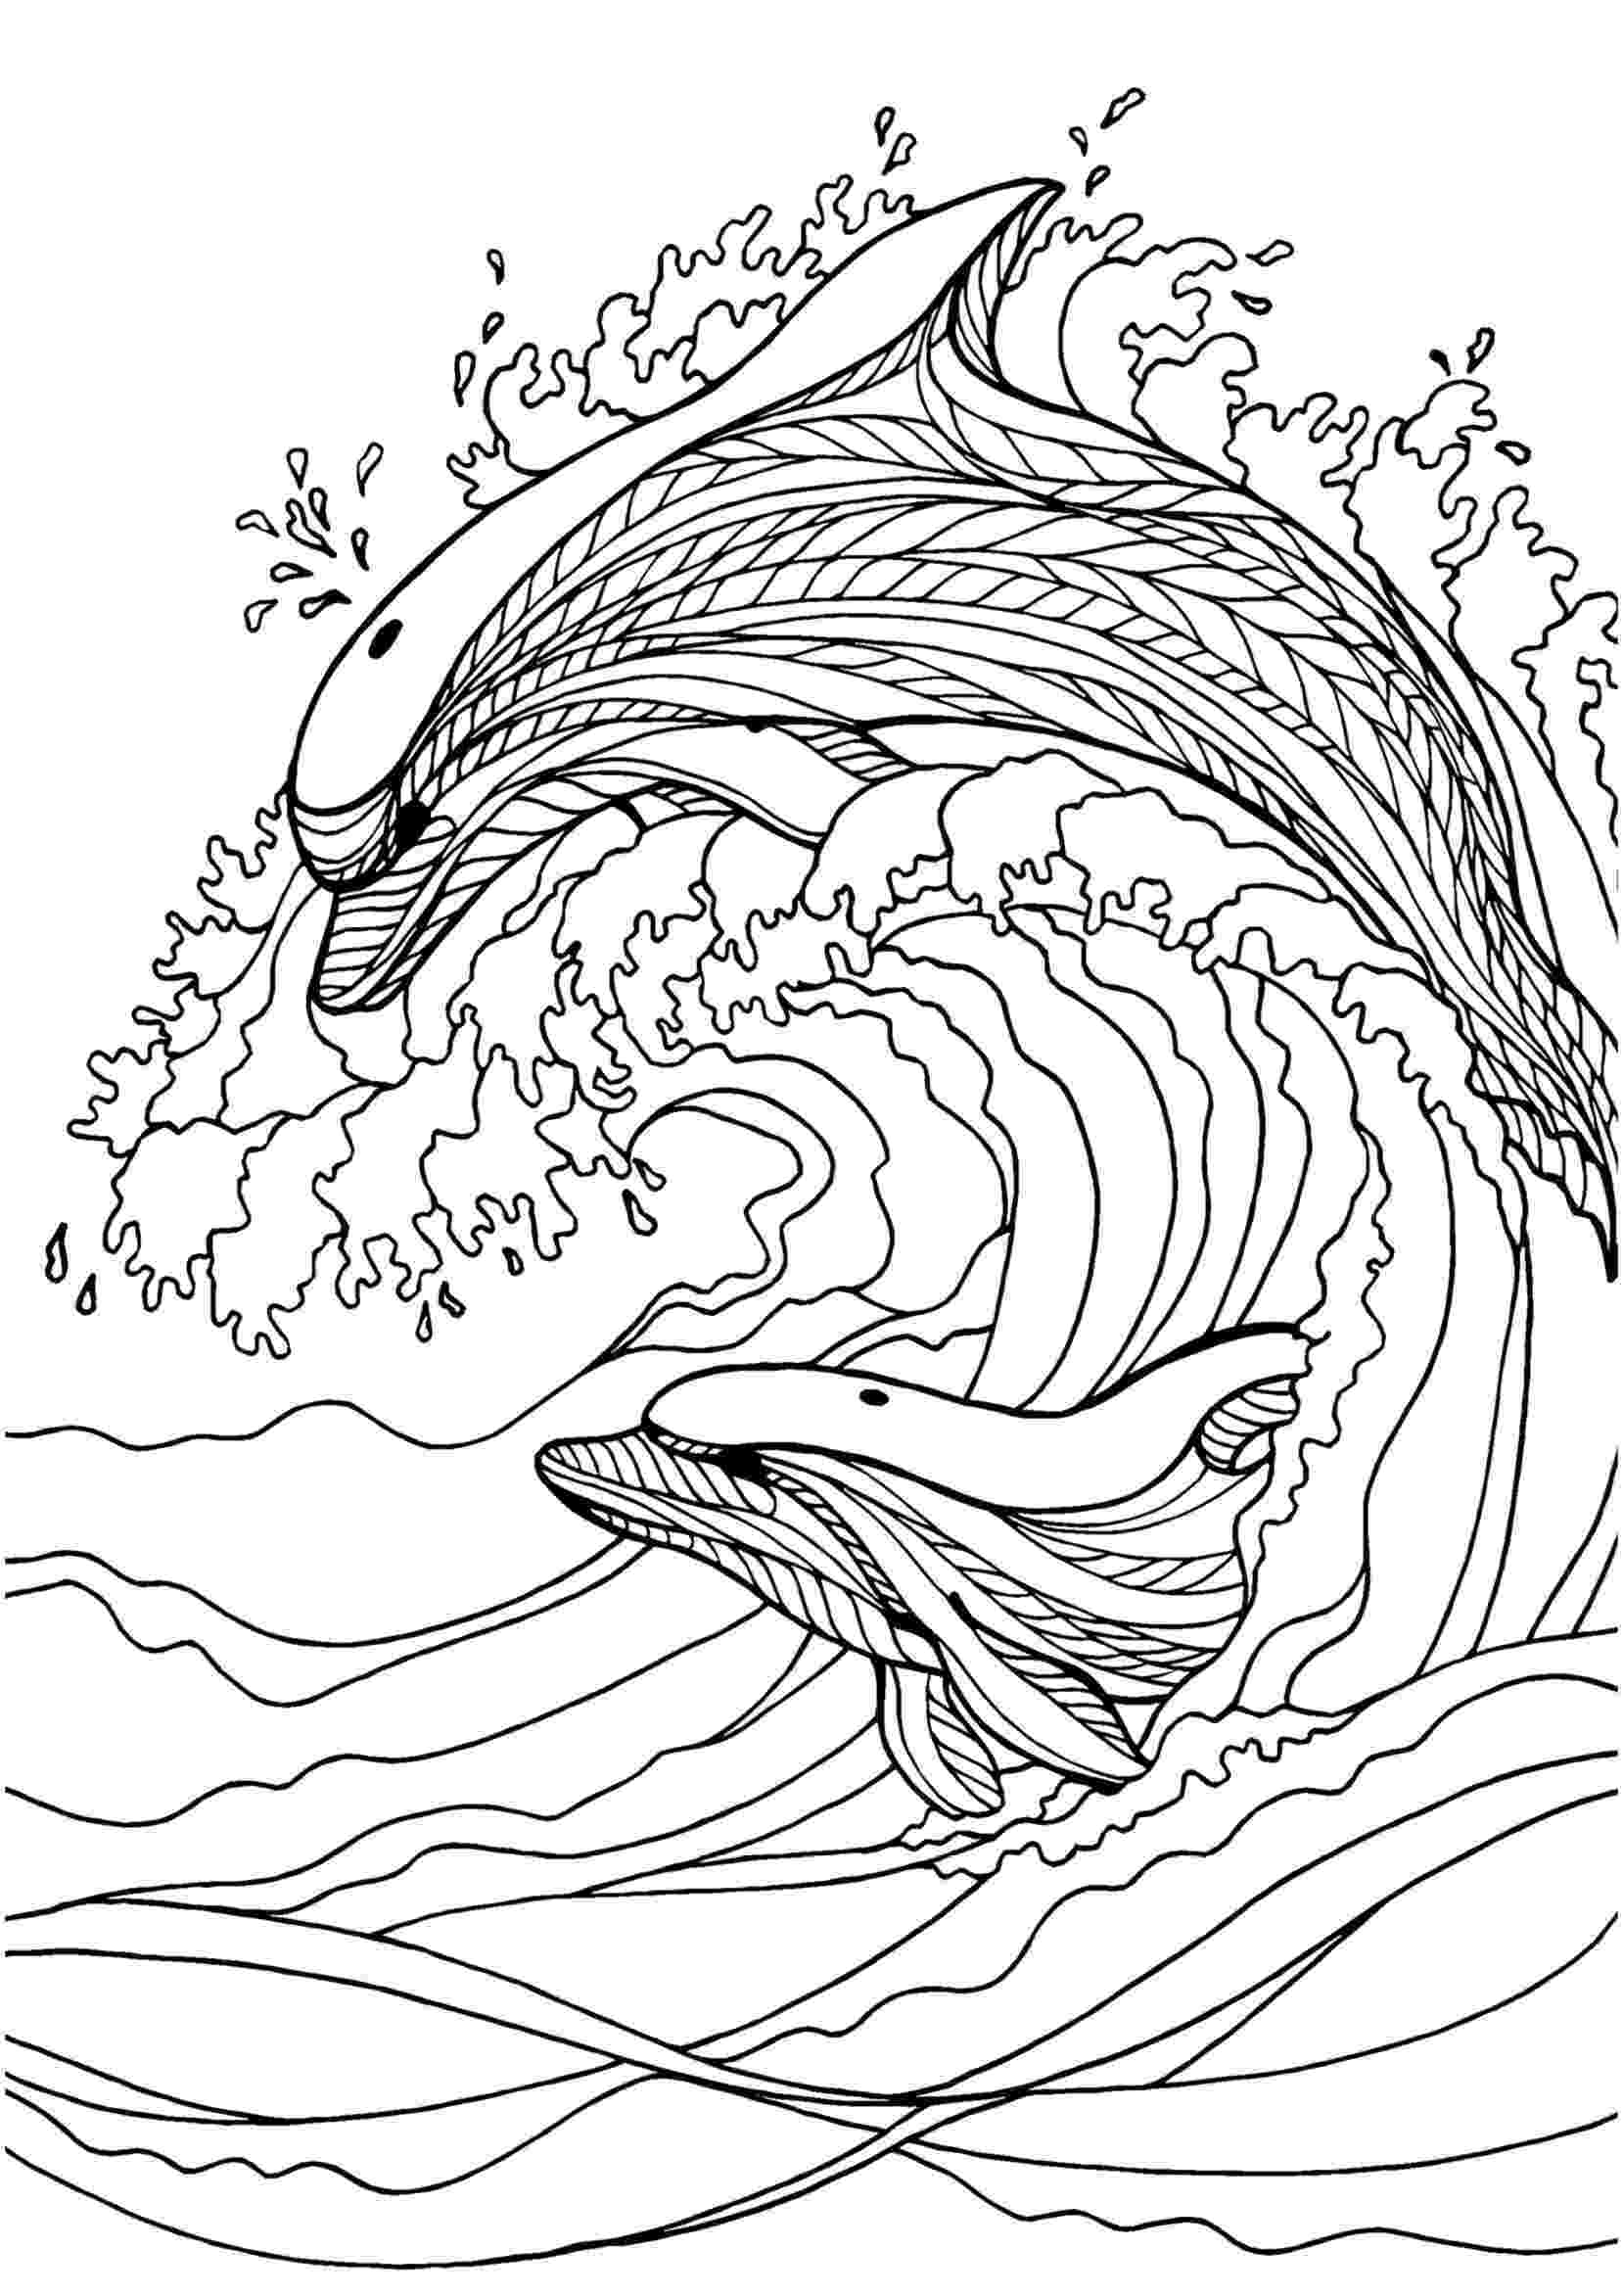 dolphin coloring pages dolphin adult colouring page colouring in sheets art coloring pages dolphin 